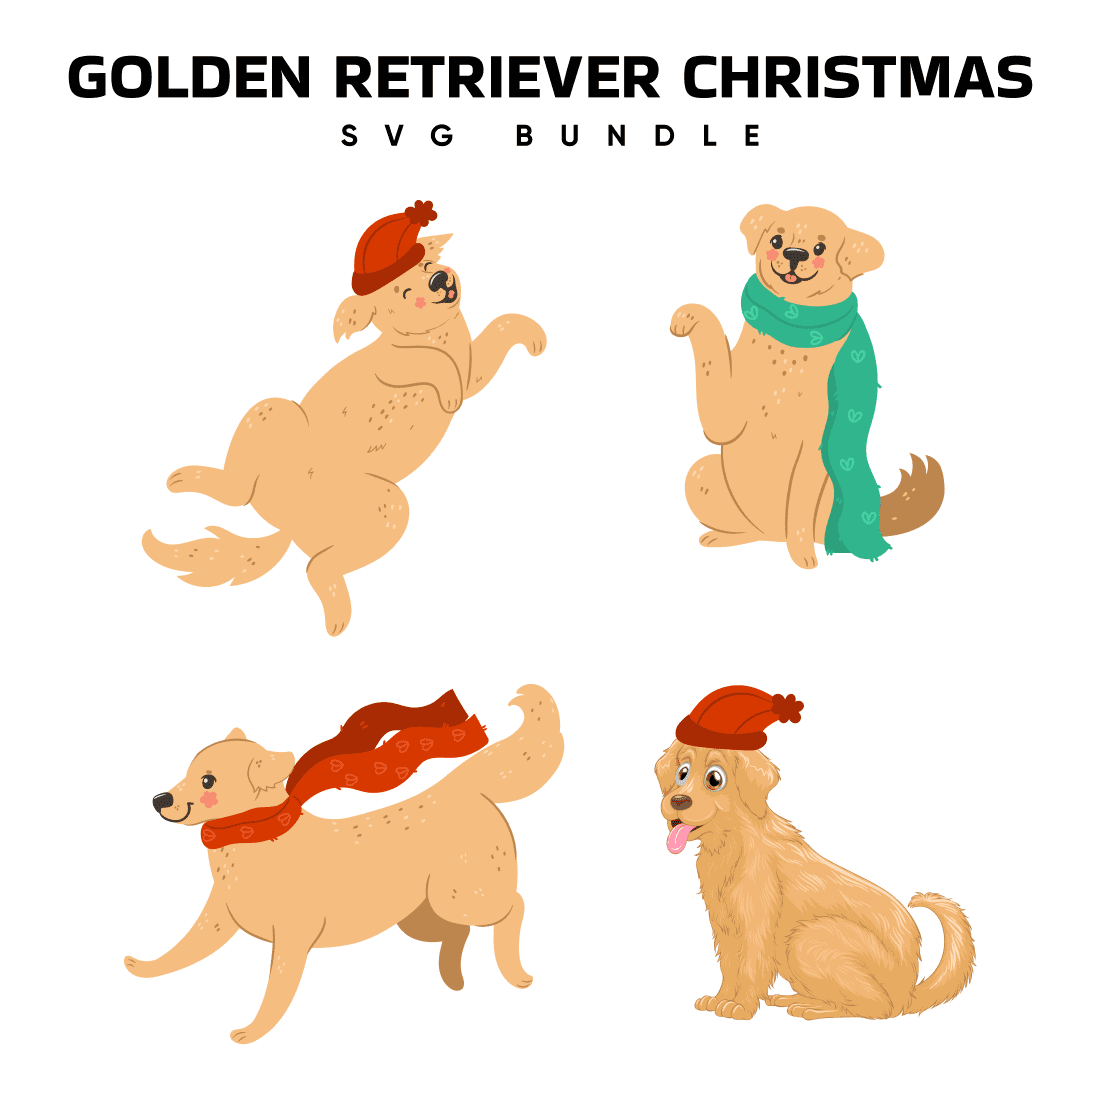 Image of a happy golden retriever in a Christmas outfit.